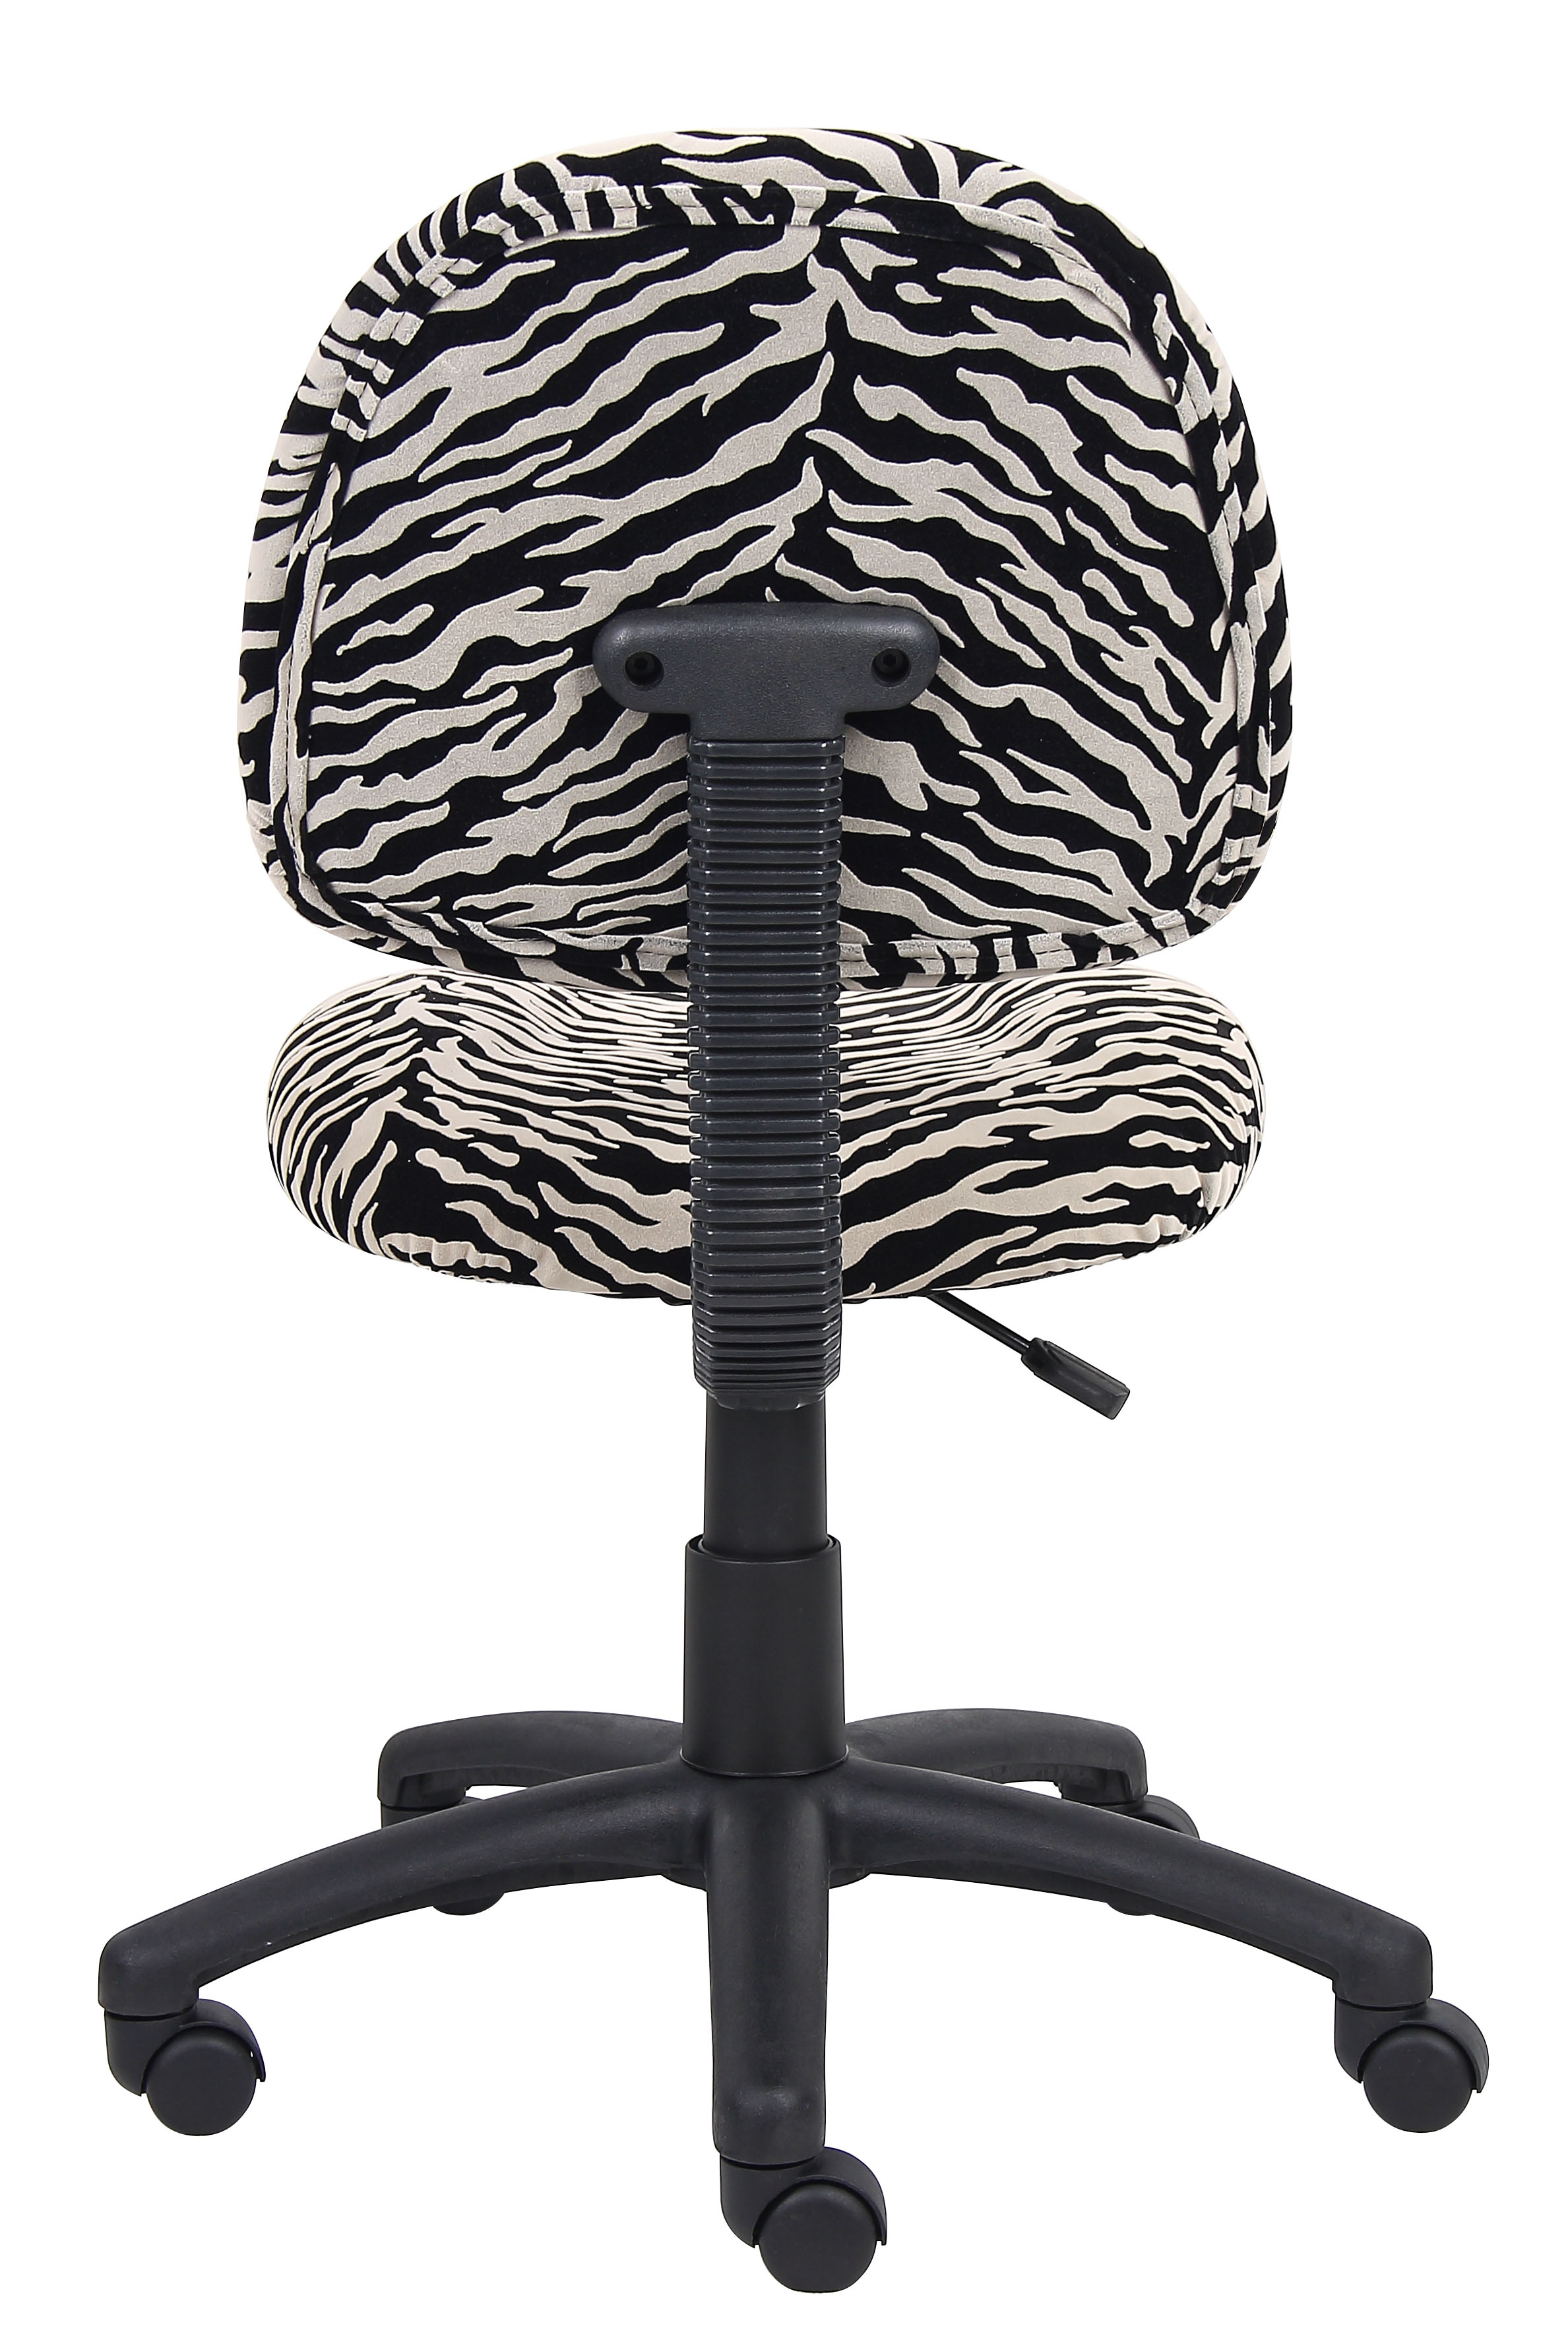 Boss Office Products Zebra Perfect Posture Delubye Modern Home Office Chair without Arms - image 4 of 9